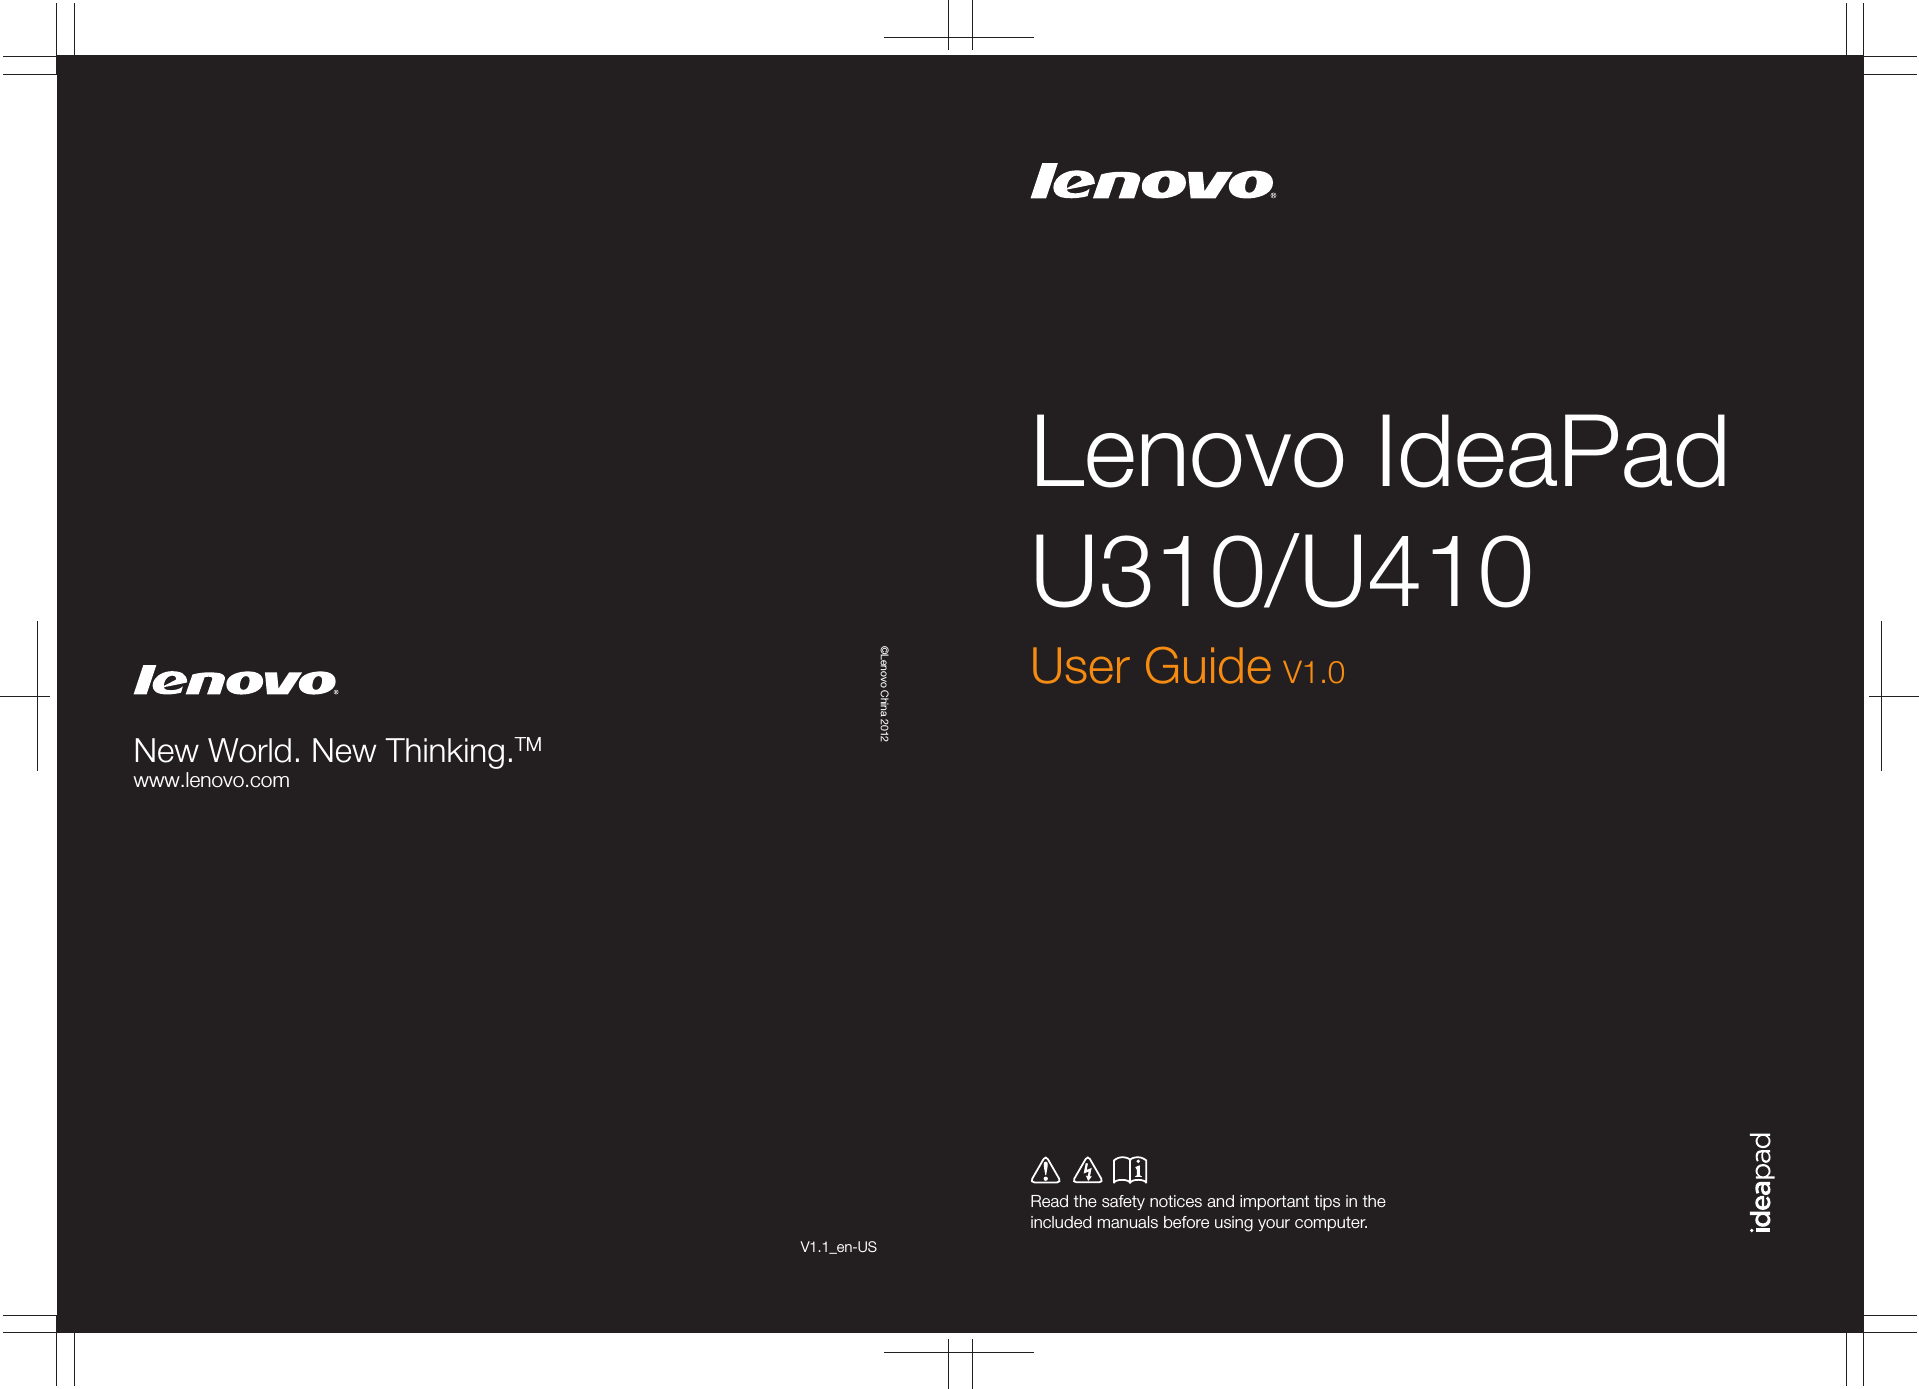 Lenovo IdeaPad U310/U410Read the safety notices and important tips in the included manuals before using your computer.©Lenovo China 2012New World. New Thinking.TMwww.lenovo.comV1.1_en-USUser Guide V1.0